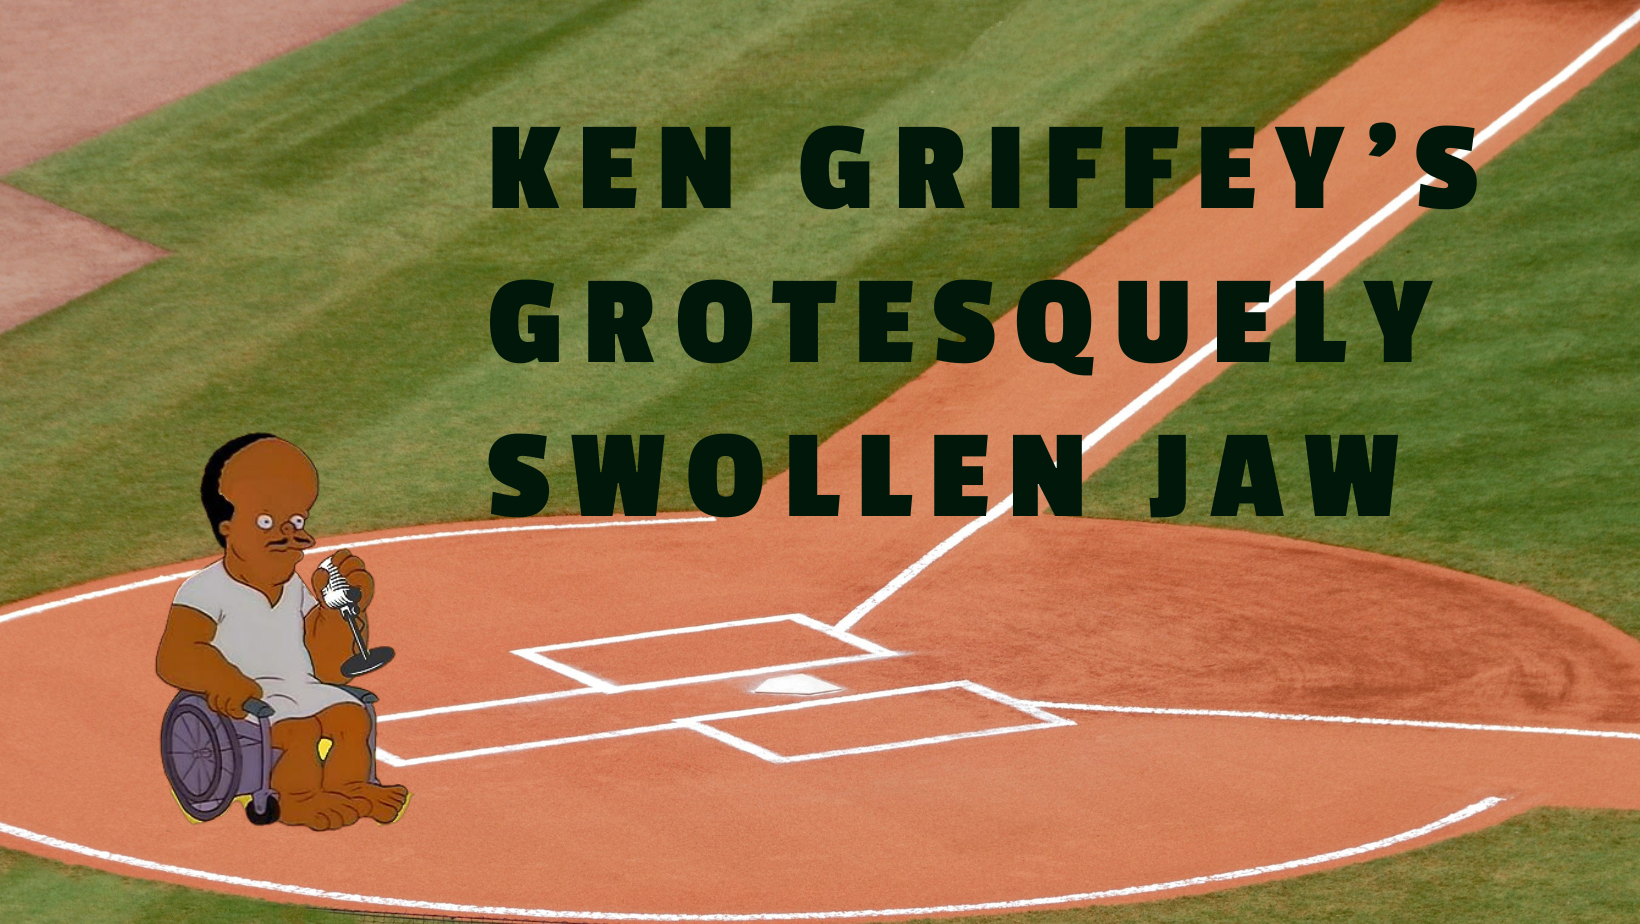 Ken Griffey's Grotesquely Swollen Jaw PODCAST